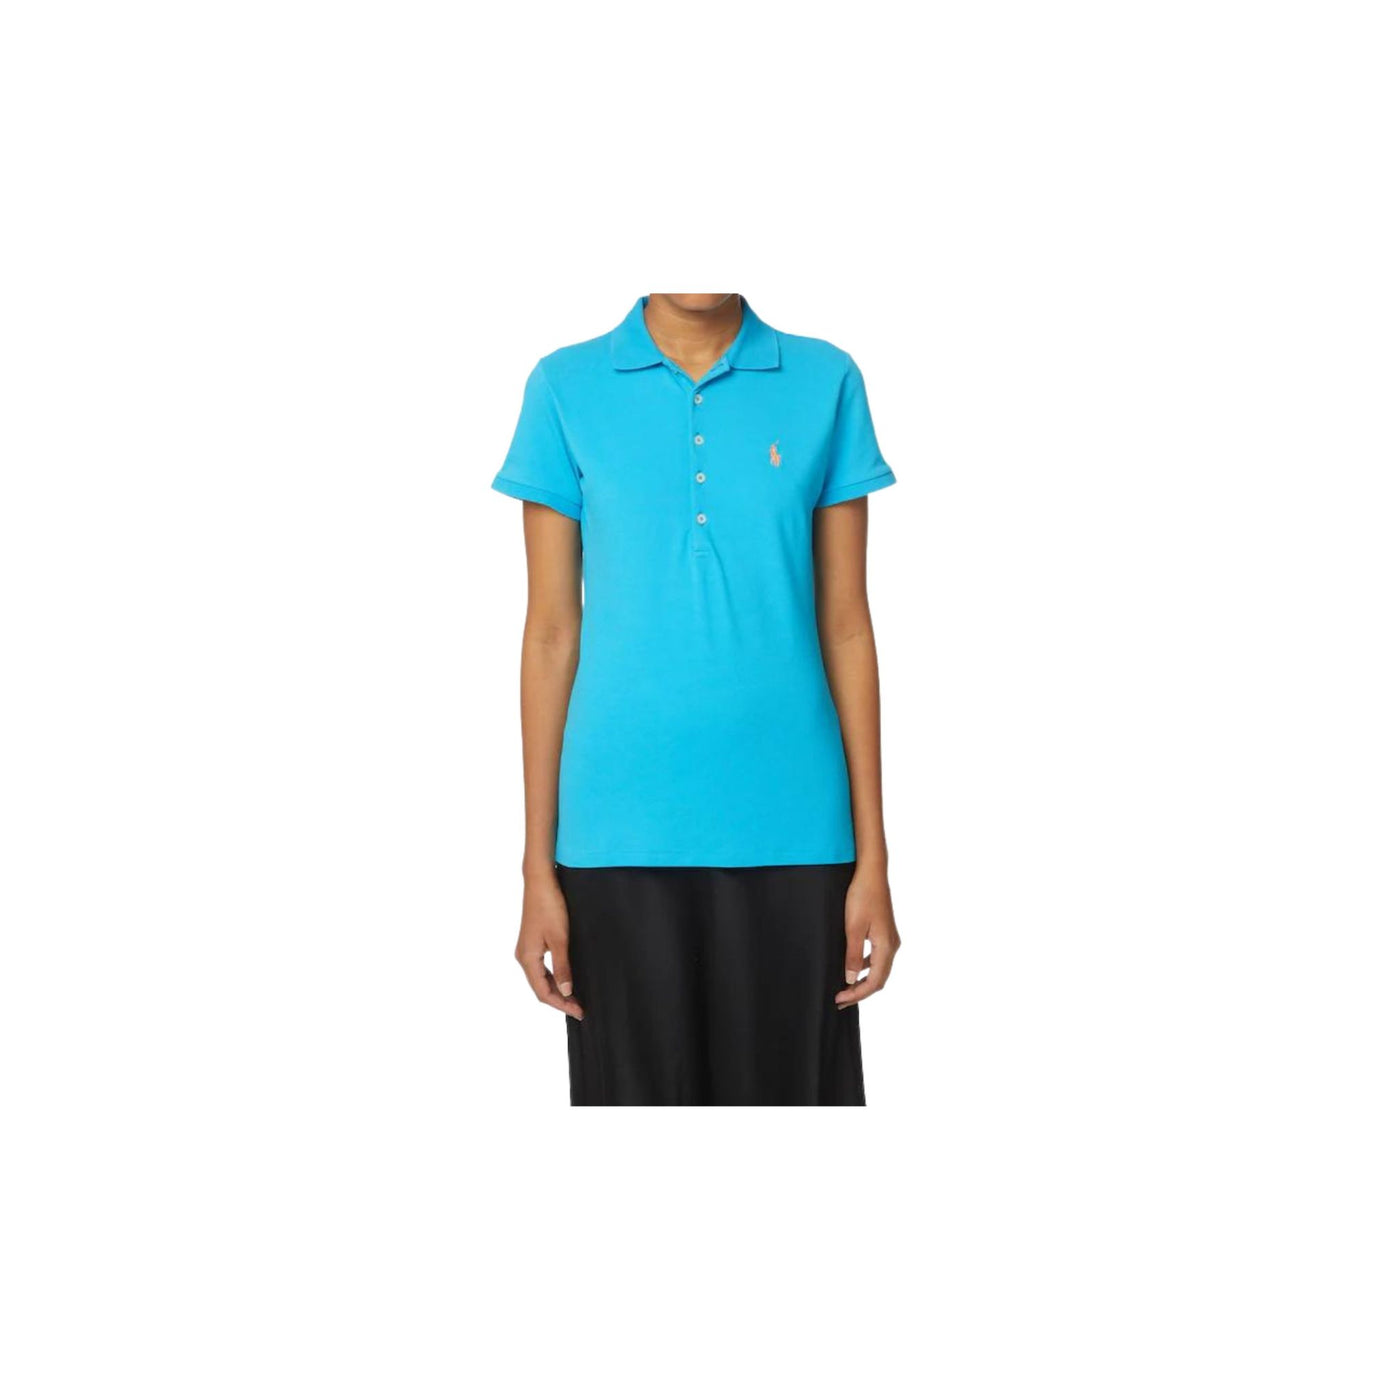 Women's polo shirt in solid color with logo embroidered on the chest